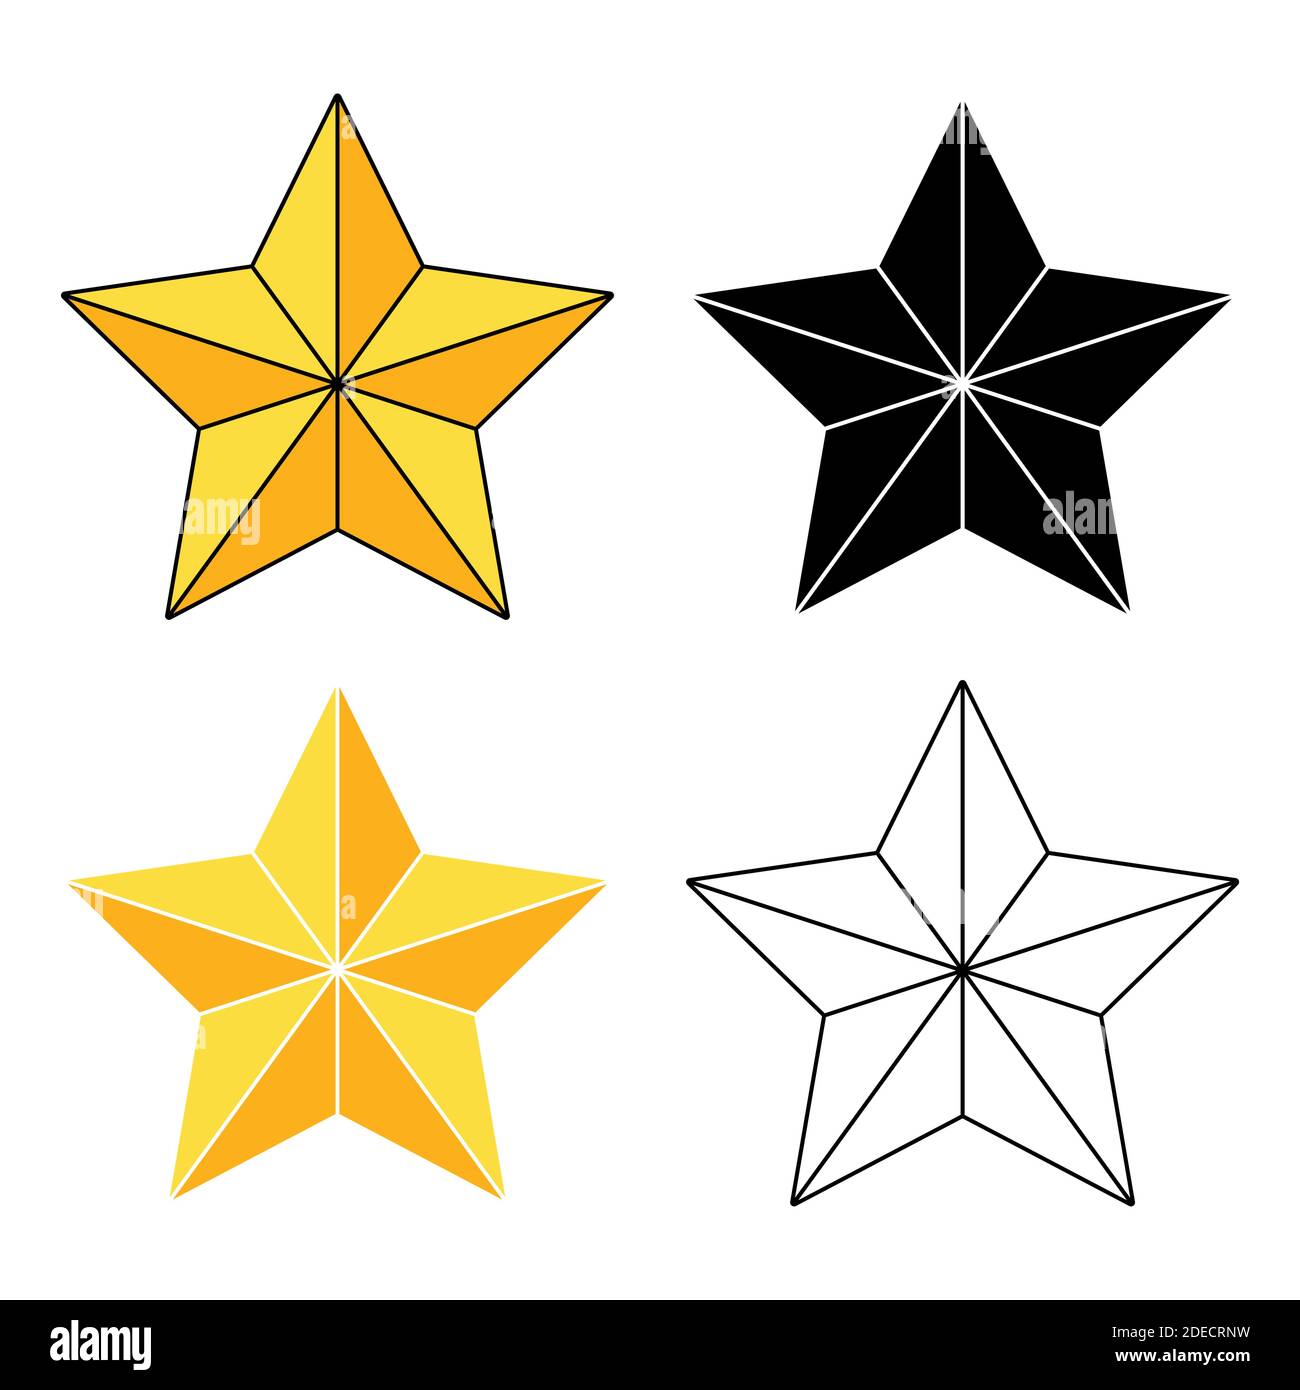 Golden star icon set isolated on white background. Gold holiday light. Collection of Christmas Vector ornament. Illustration of  christian symbol. Sil Stock Vector